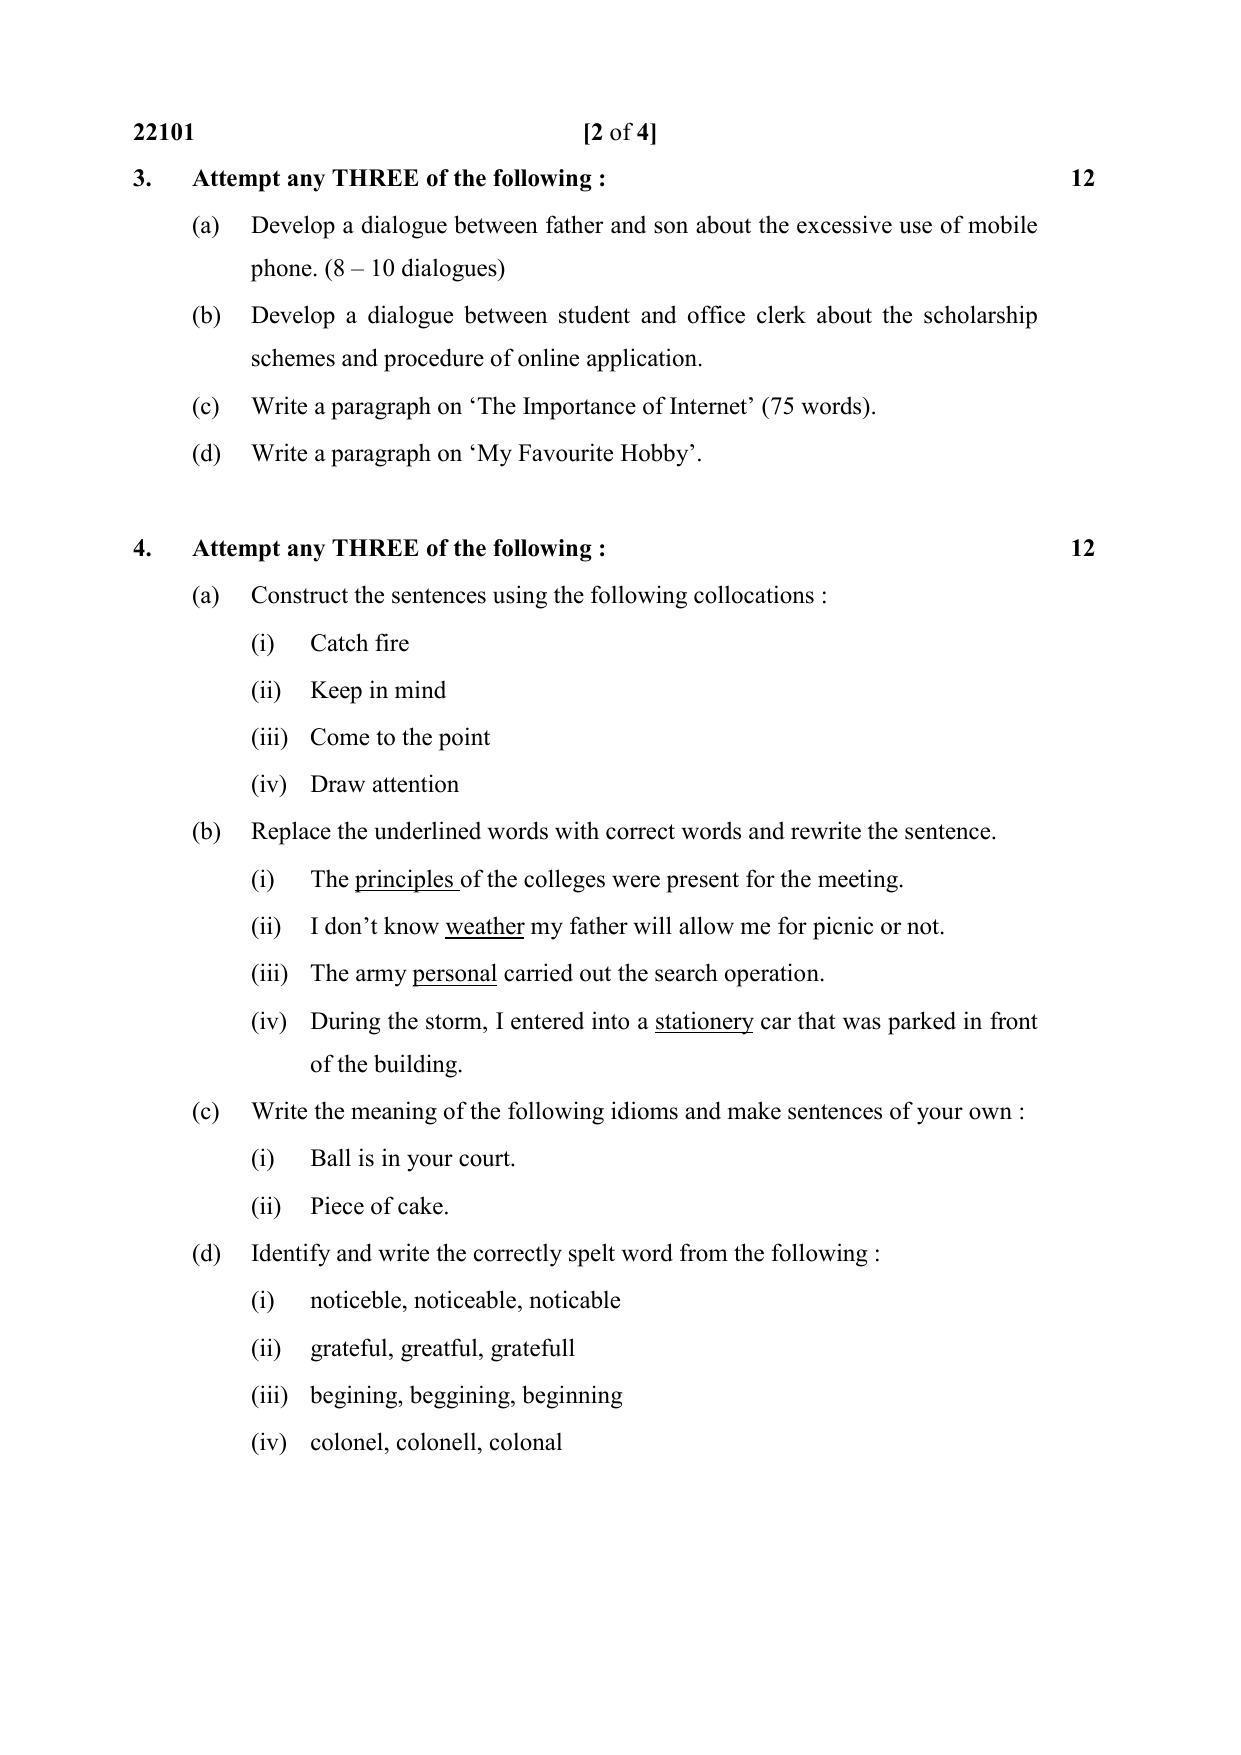 MSBTE Question Paper - 2019 - English - Page 2